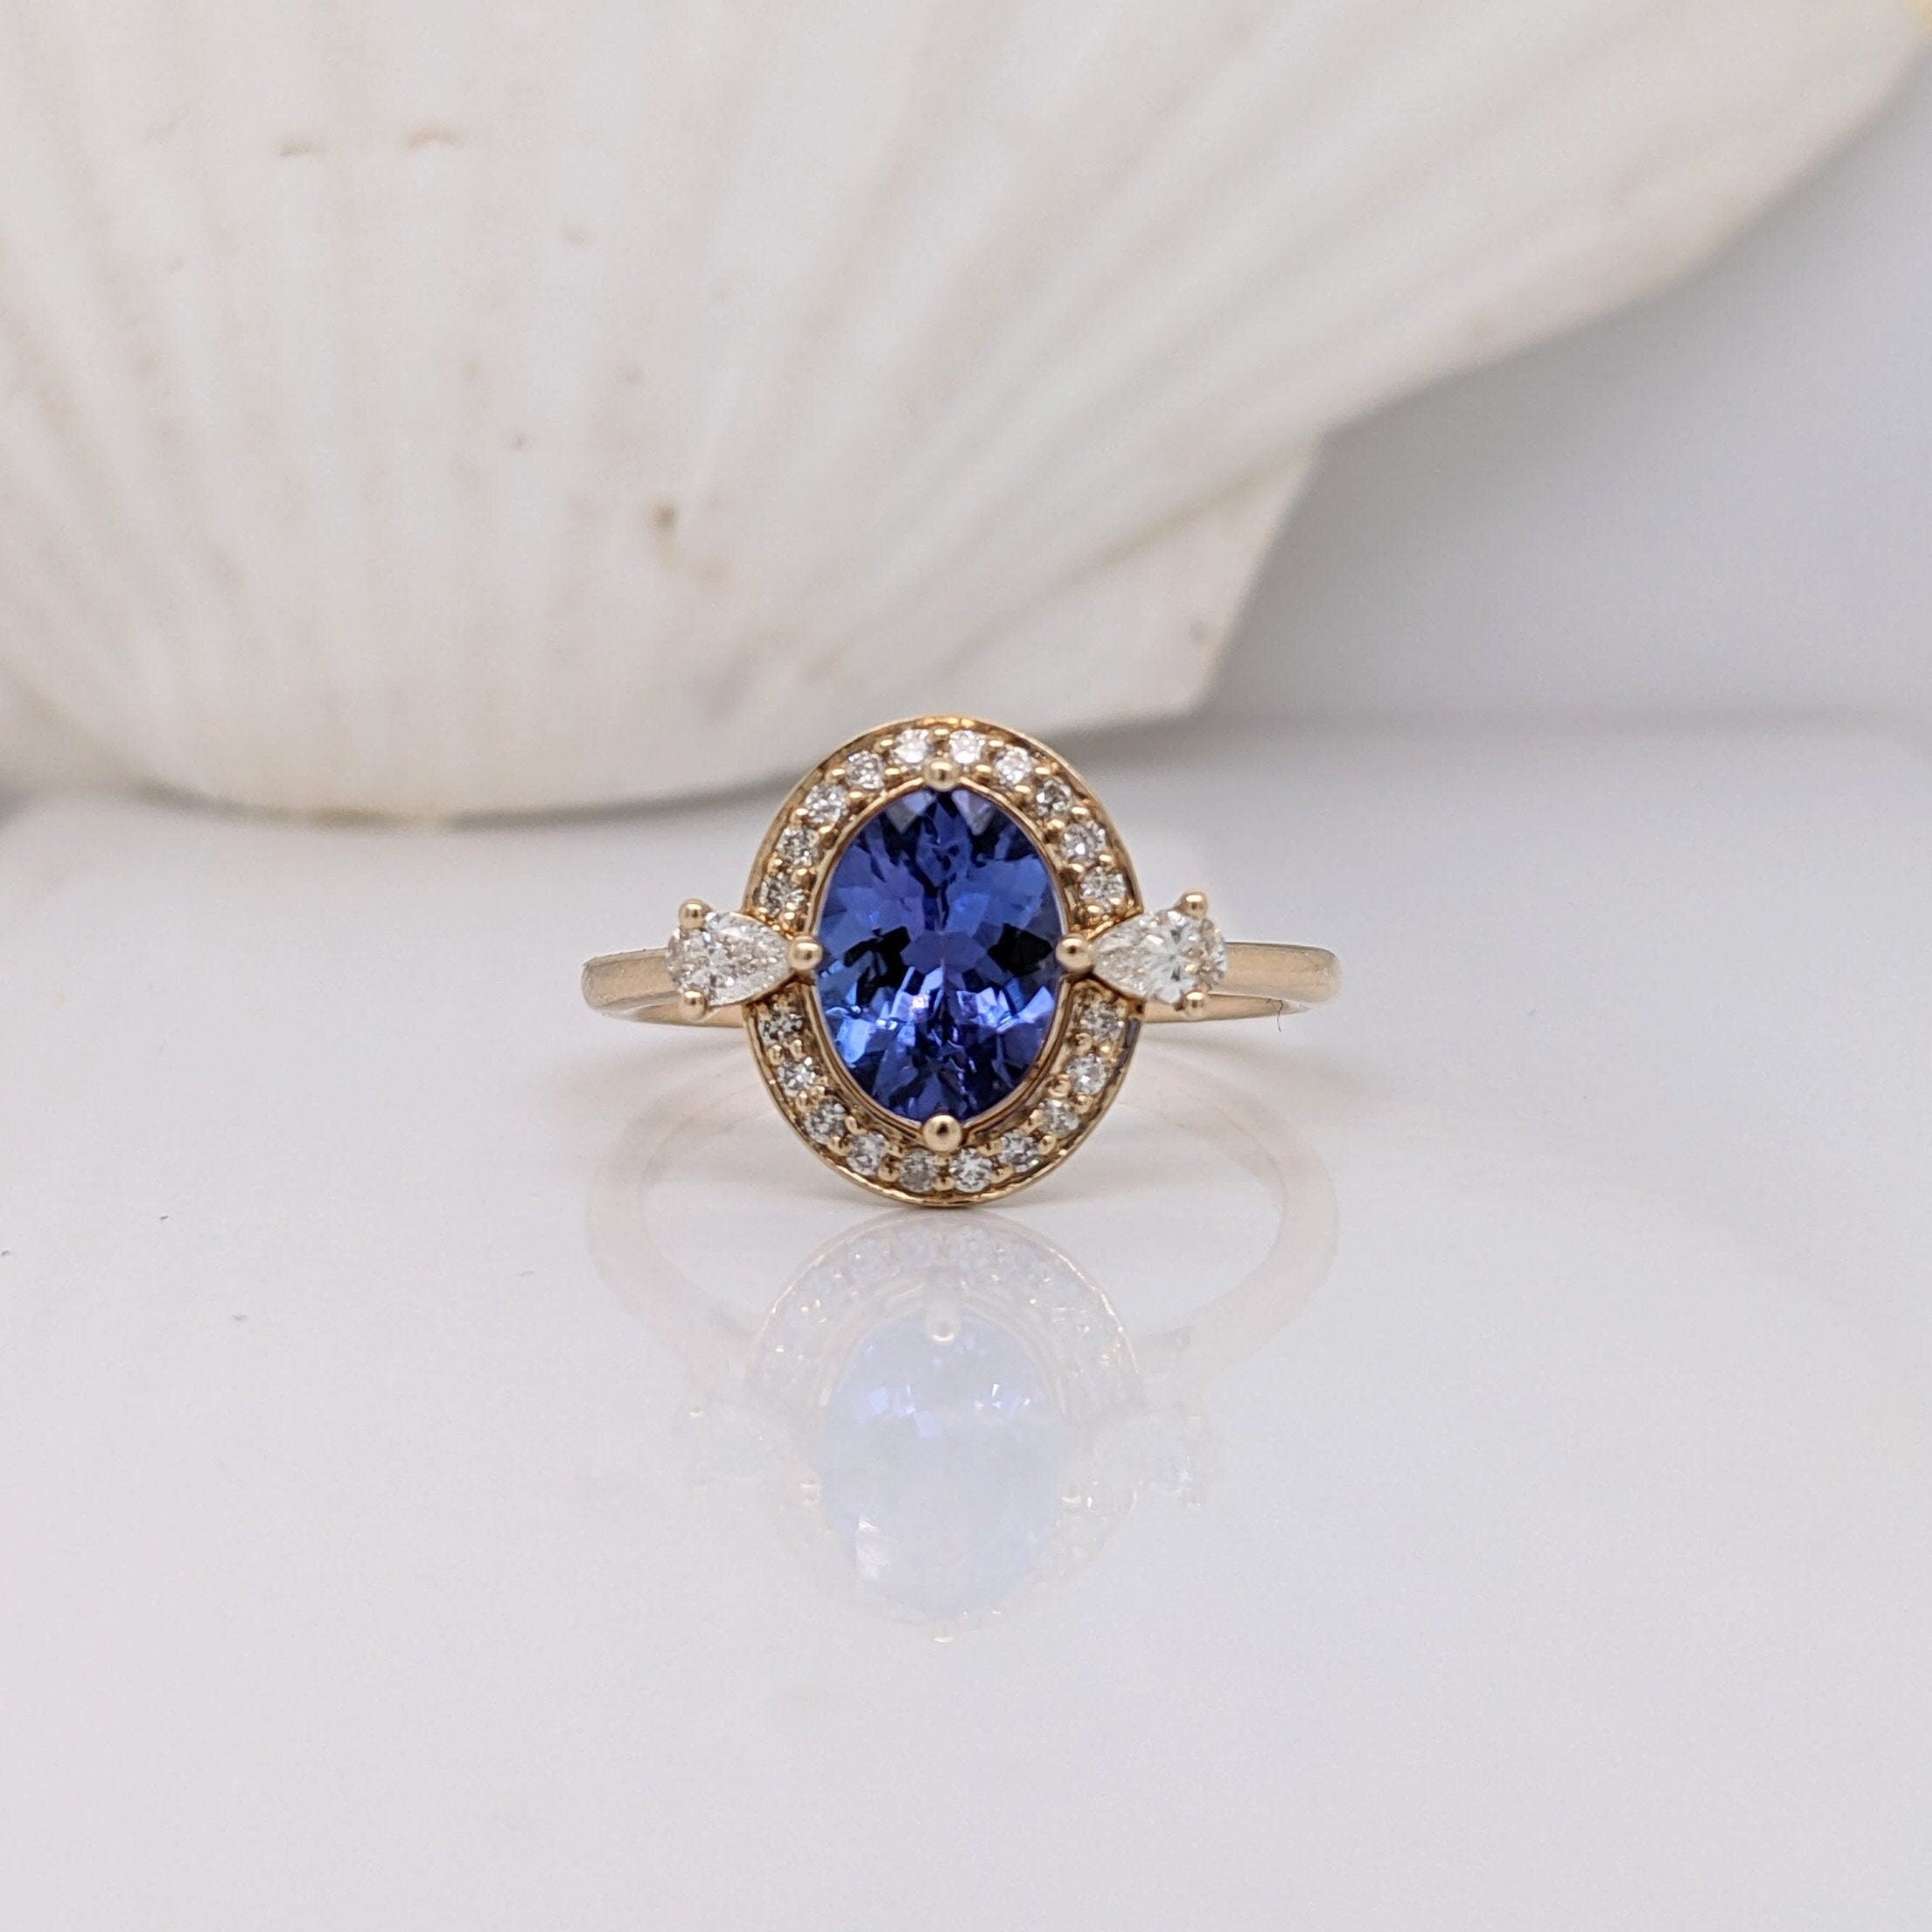 Unique Tanzanite Ring in 14k Solid Yellow Gold with Round and Pear Shape Natural Diamond Accents | Oval 8x6mm | December | Compass Prong